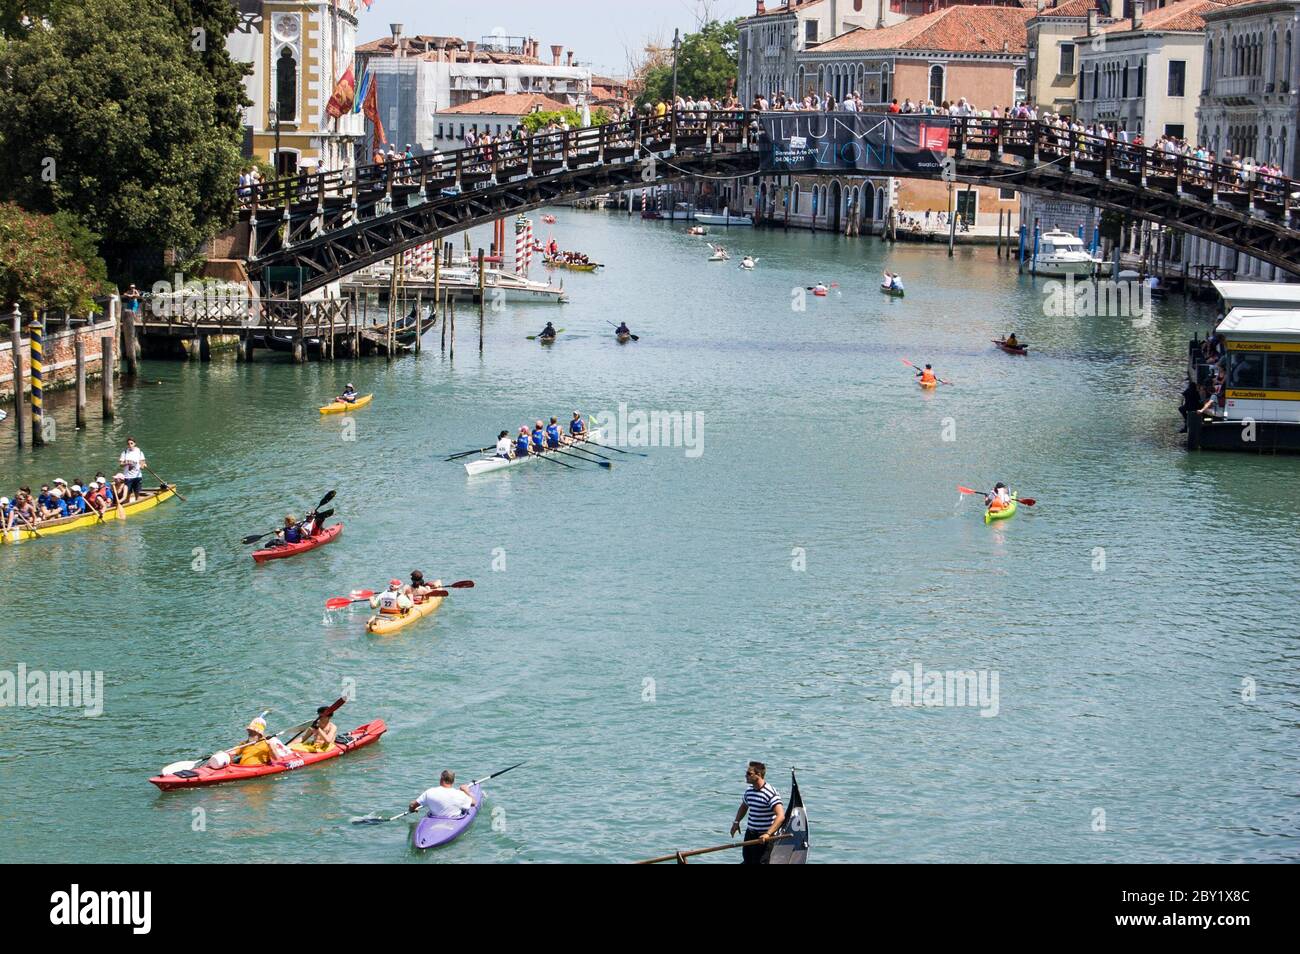 Venice, Italy - June 12, 2011: The Grand Canal is filled with small boats as sportsmen and women take part in the annual Vogalonga Regatta in Venice. Stock Photo